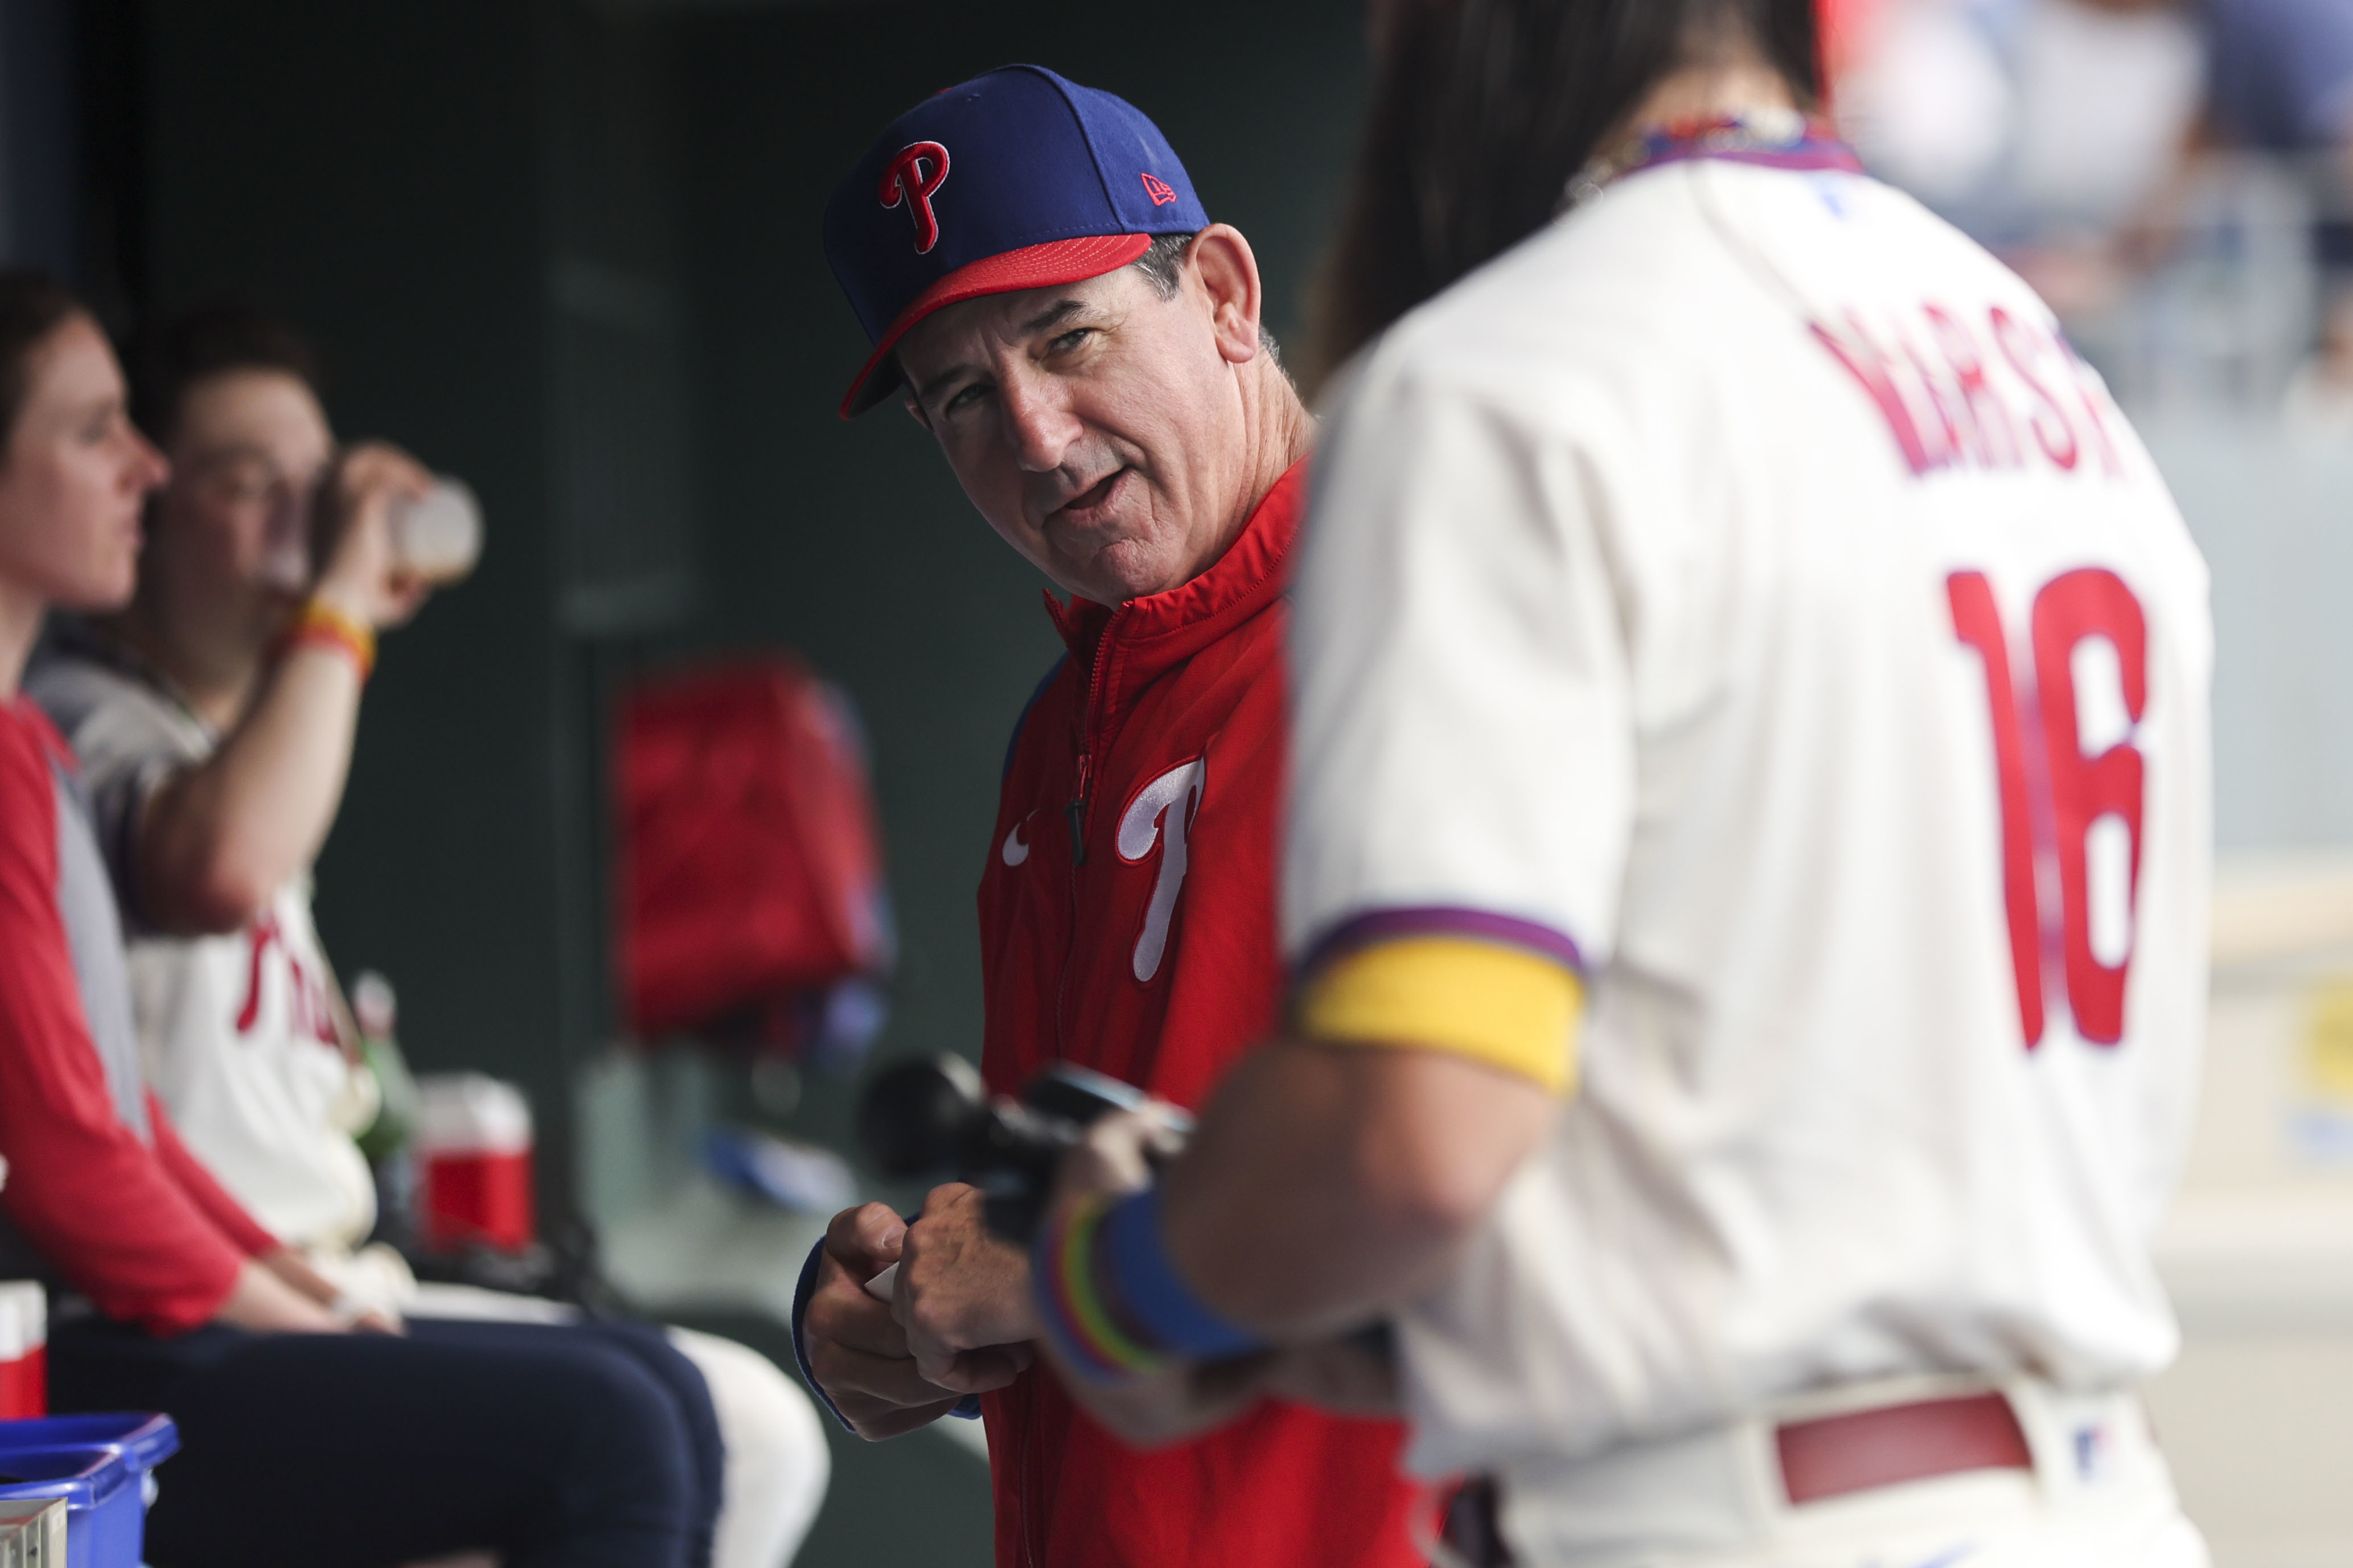 Are the Philadelphia Phillies in need of a uniform refresh?